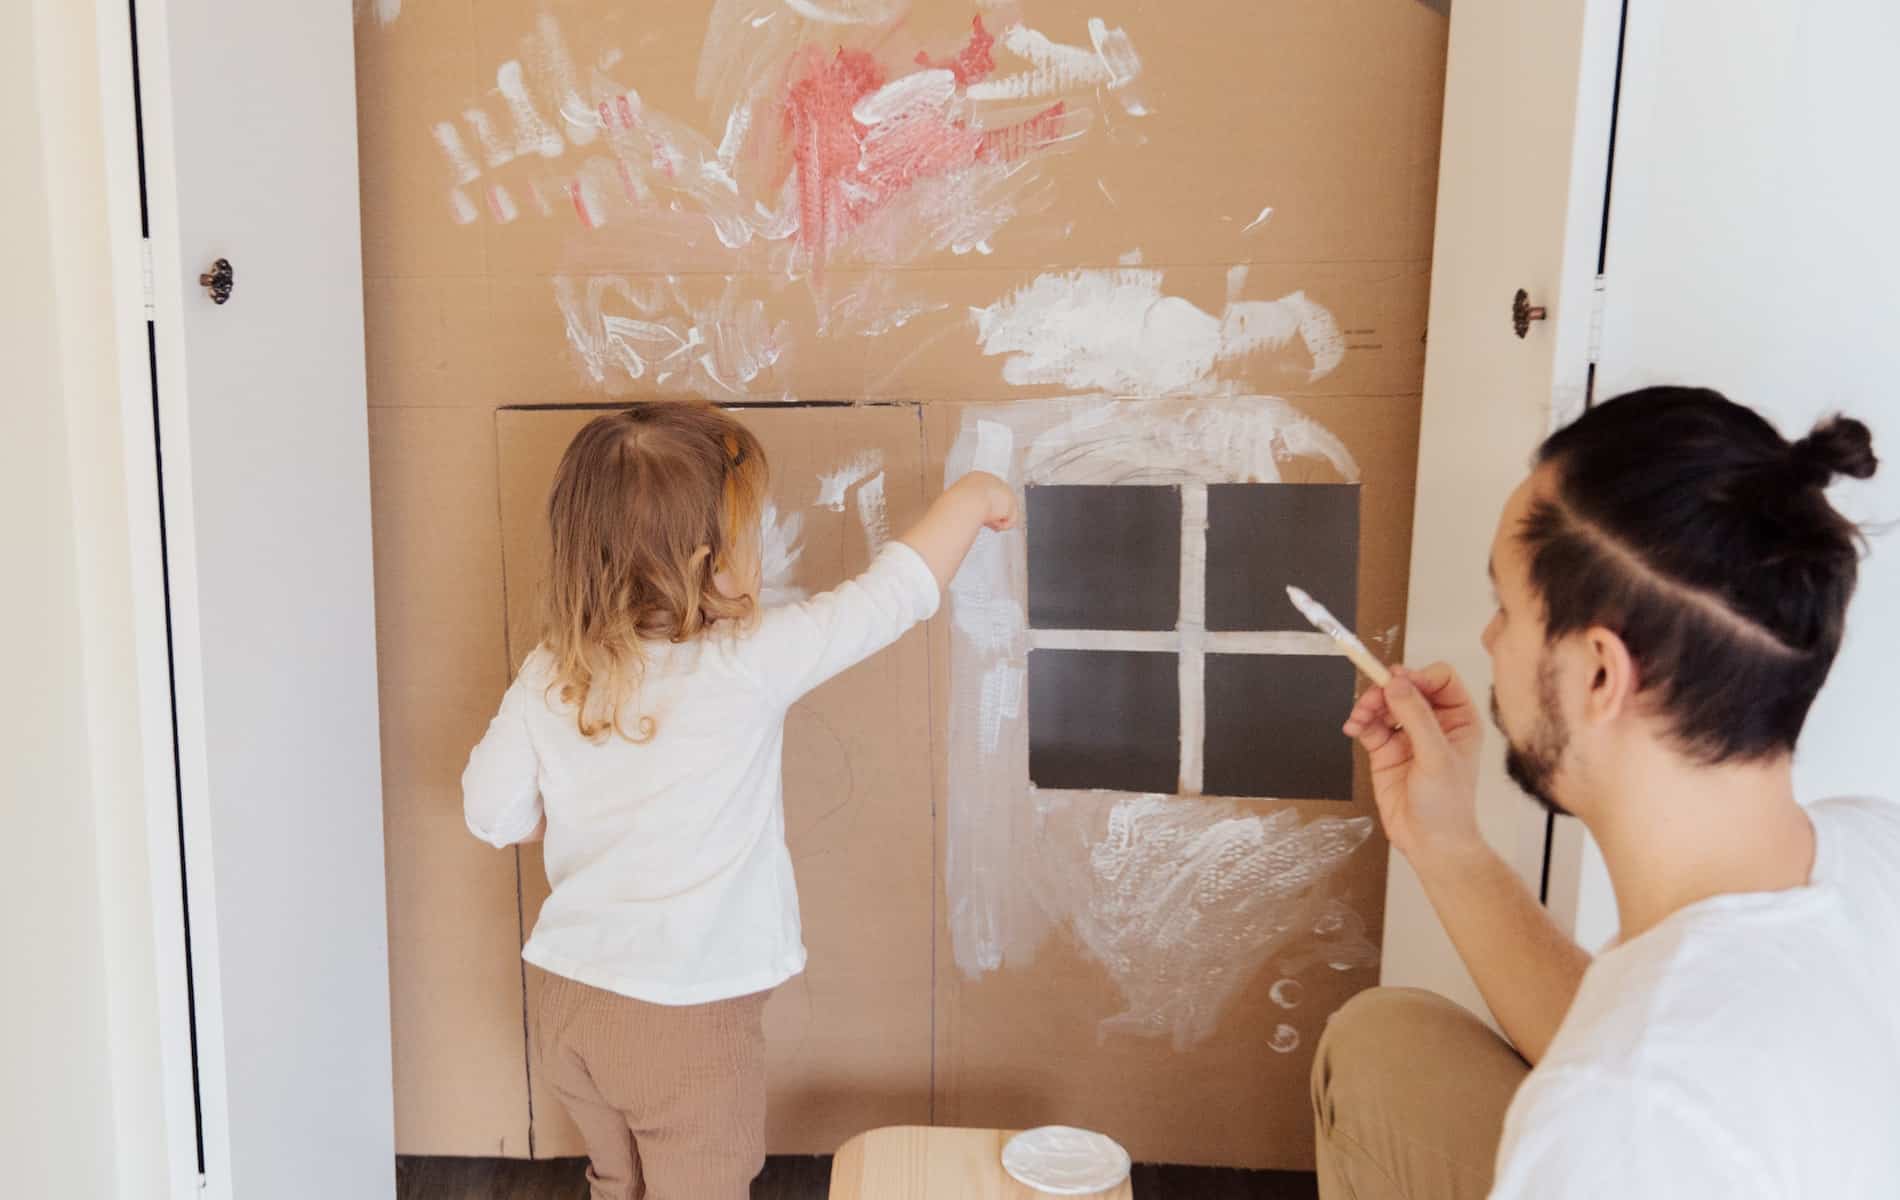 48 Activities to Keep Your Kids Occupied at Home